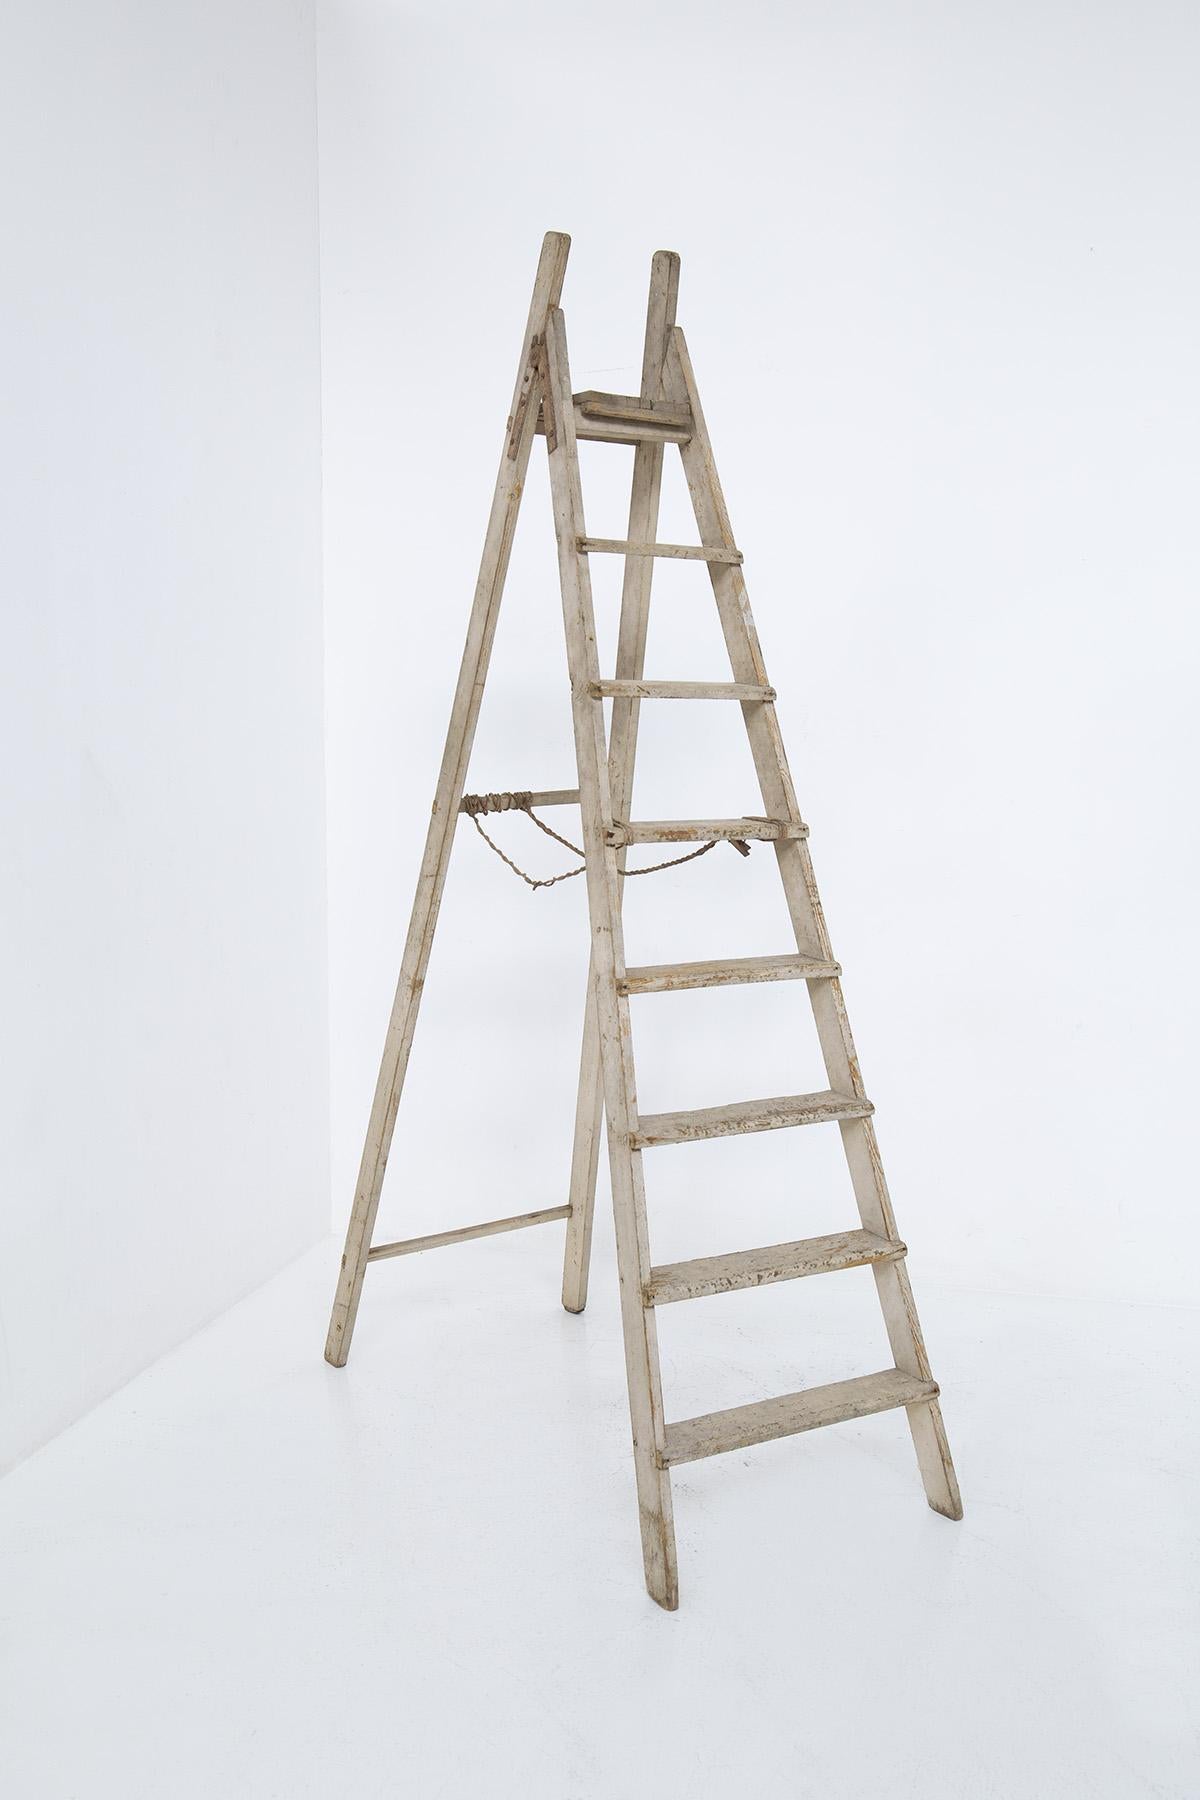 Large Italian Vintage Rustic Decorative Ladder from the 1920s The ladder is made of painted wood.
The ladder is a beautiful painted wood decorative element from the Rustic Chic period of the early 1920s, made in Italy. It can also be placed as in